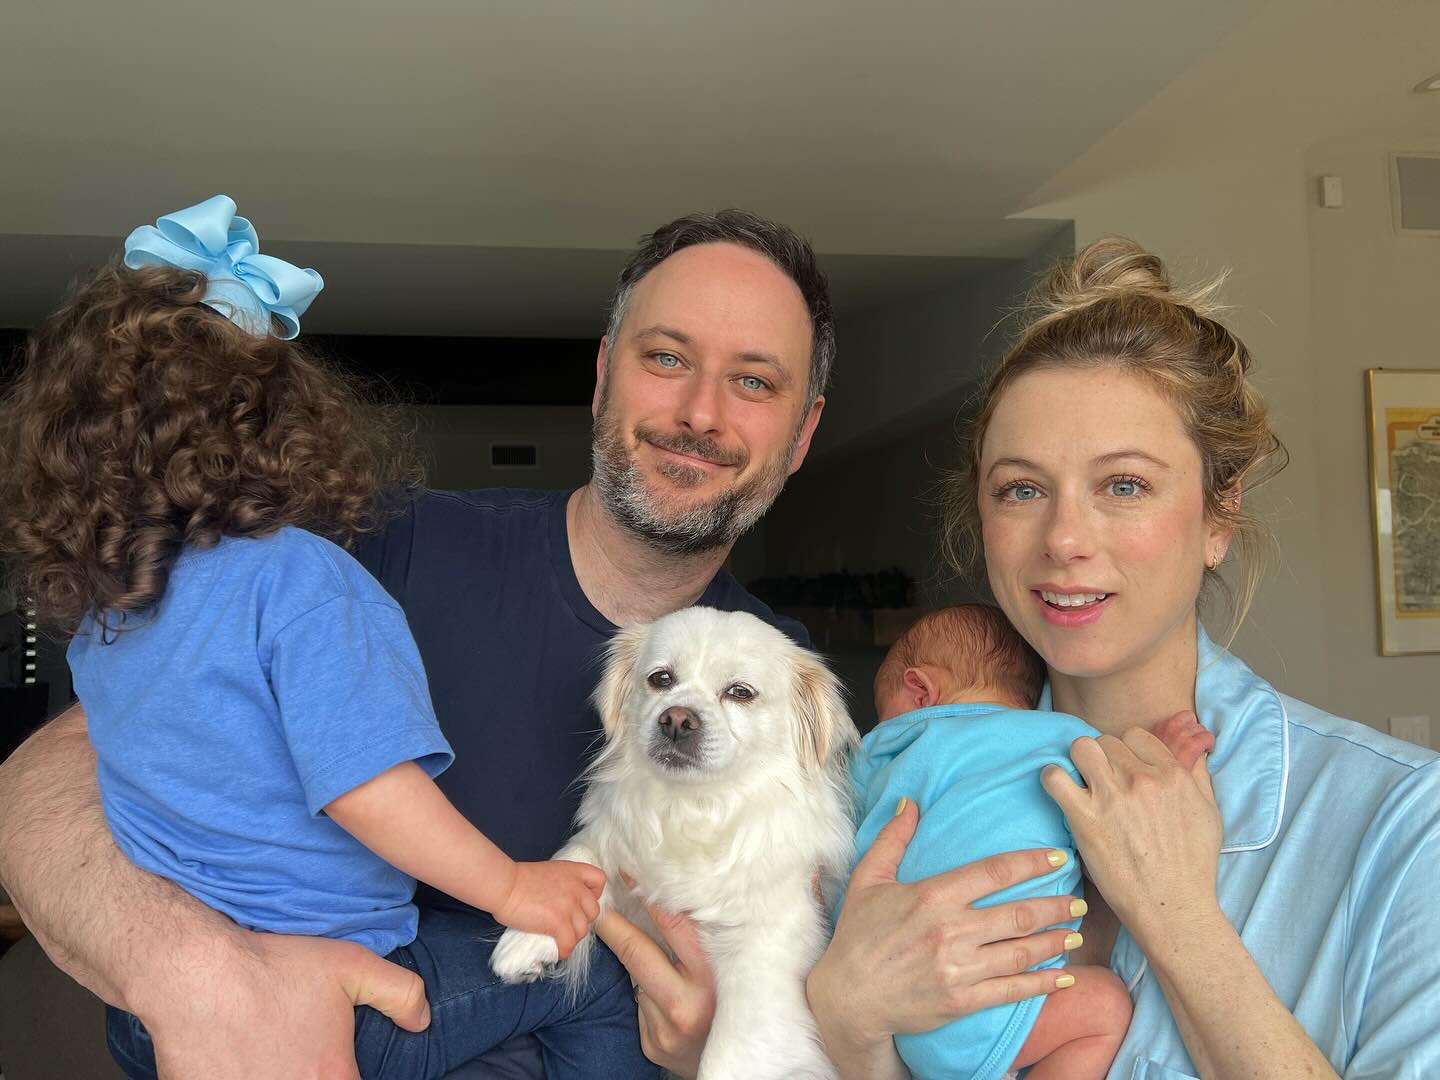 Iliza Shlesinger and her husband, Noah Galuten, with their two children and pet dog